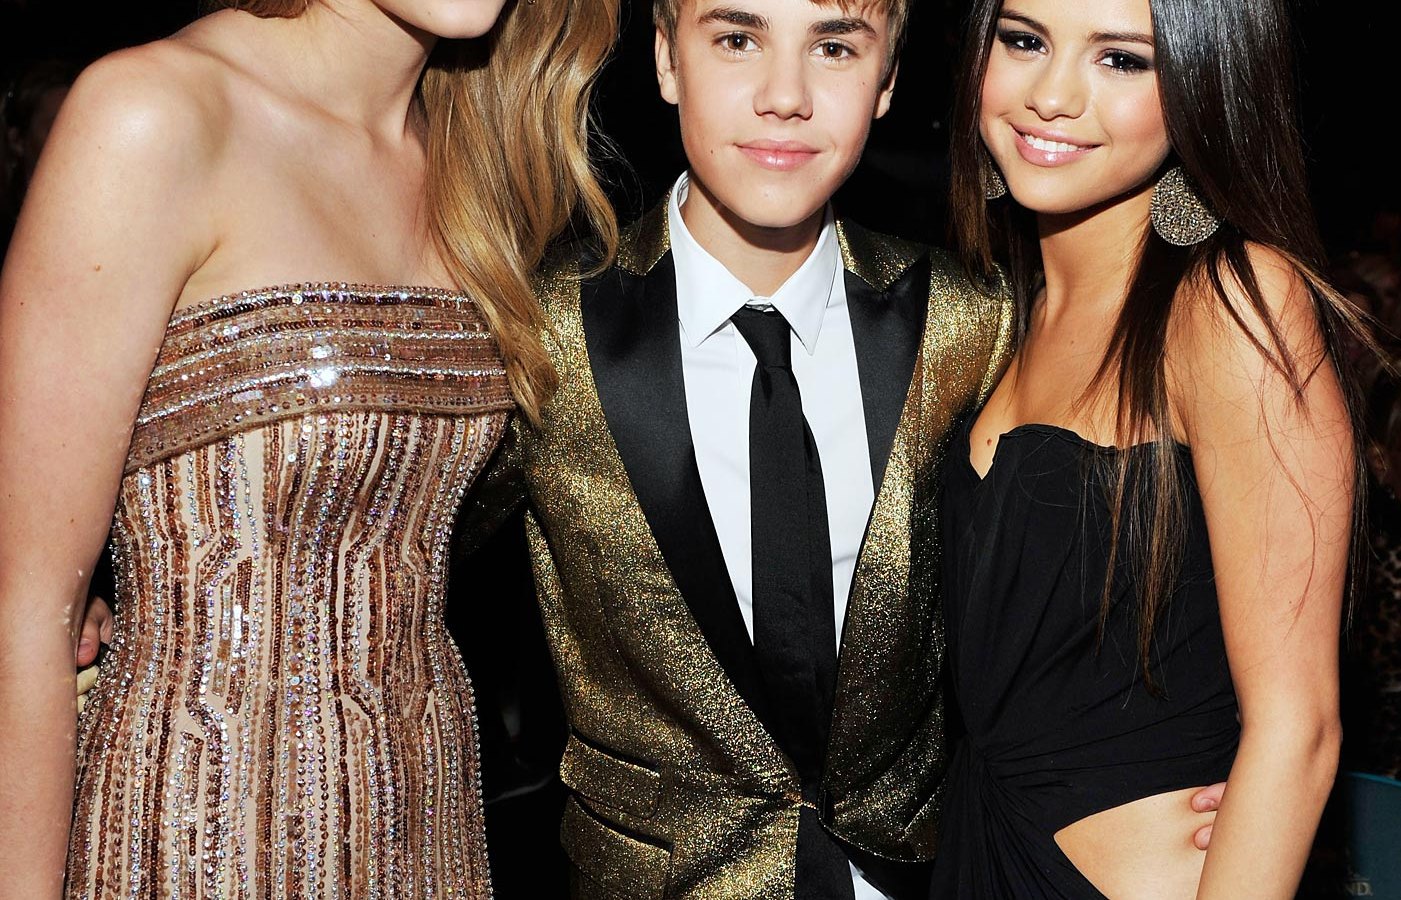 Taylor Swift, Justin Bieber and Selena Gomez on May 22, 2011